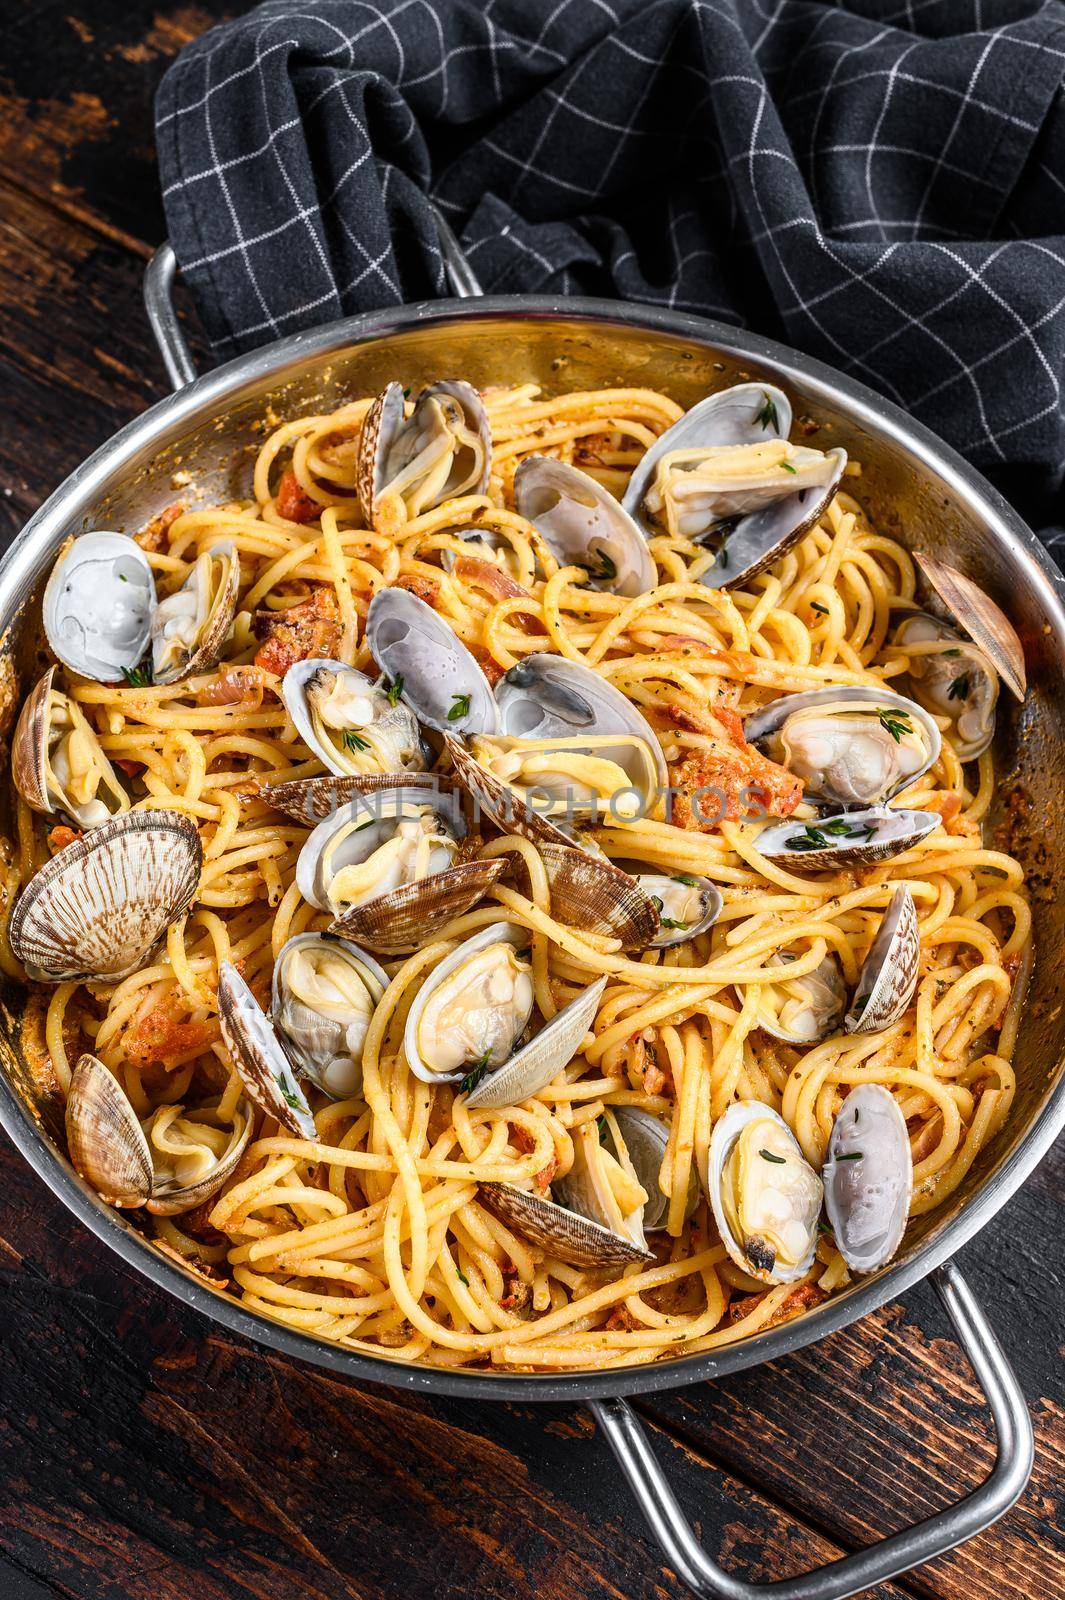 Clams vongole Seafood pasta Spaghetti in a pan. Dark Wooden background. Top view by Composter